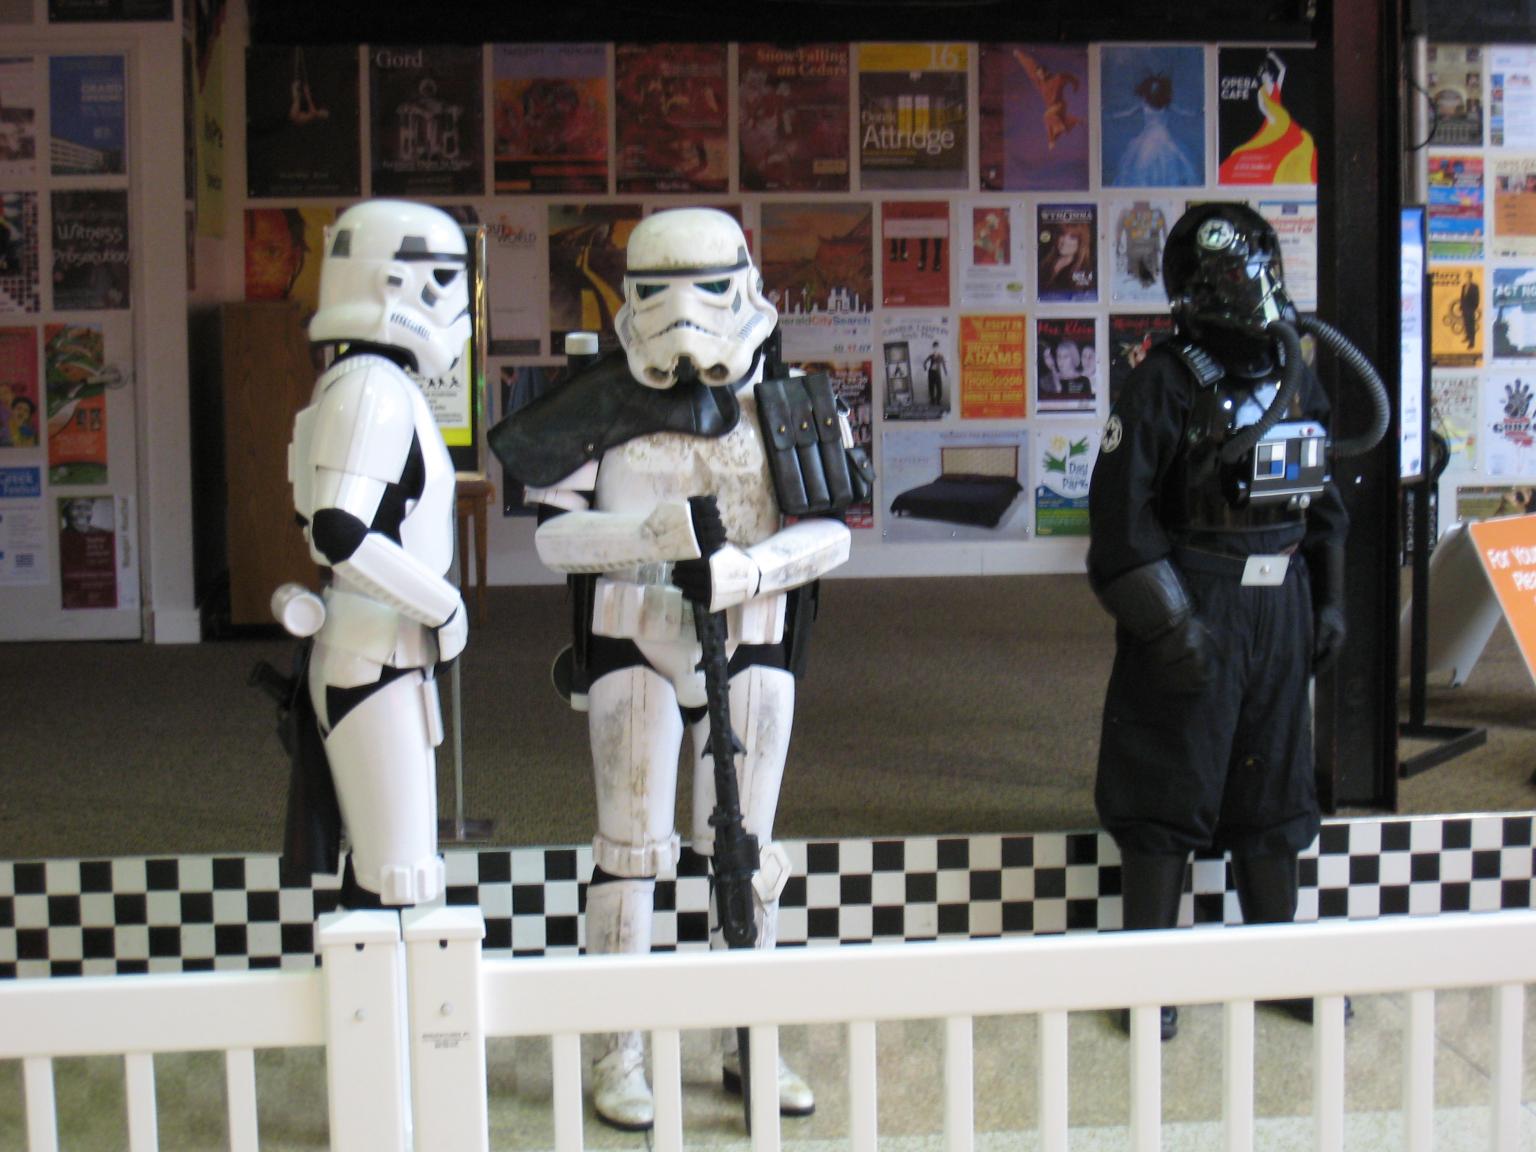 Mall Stormtroopers || Canon Powe/4.6 - 17.3mm@10.8 | 1/10s | f4.5 | ISO210 || 2007-09-15 14:02:49